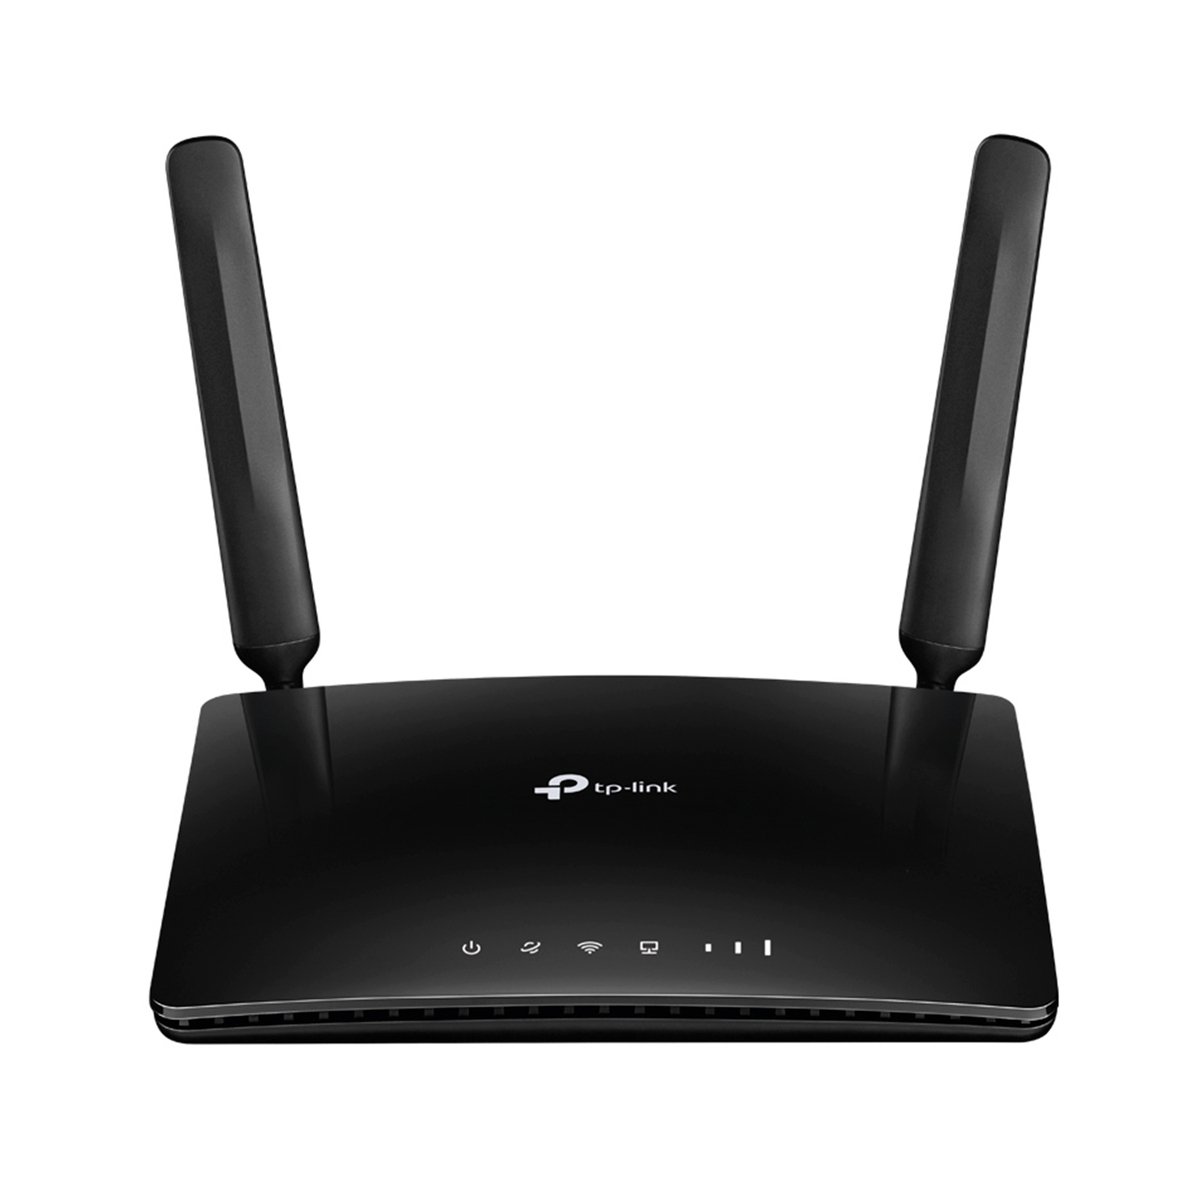 TP-LINK ARCHER A9 AC1900 Wireless MU-Mimo Gigabit Router for sale online